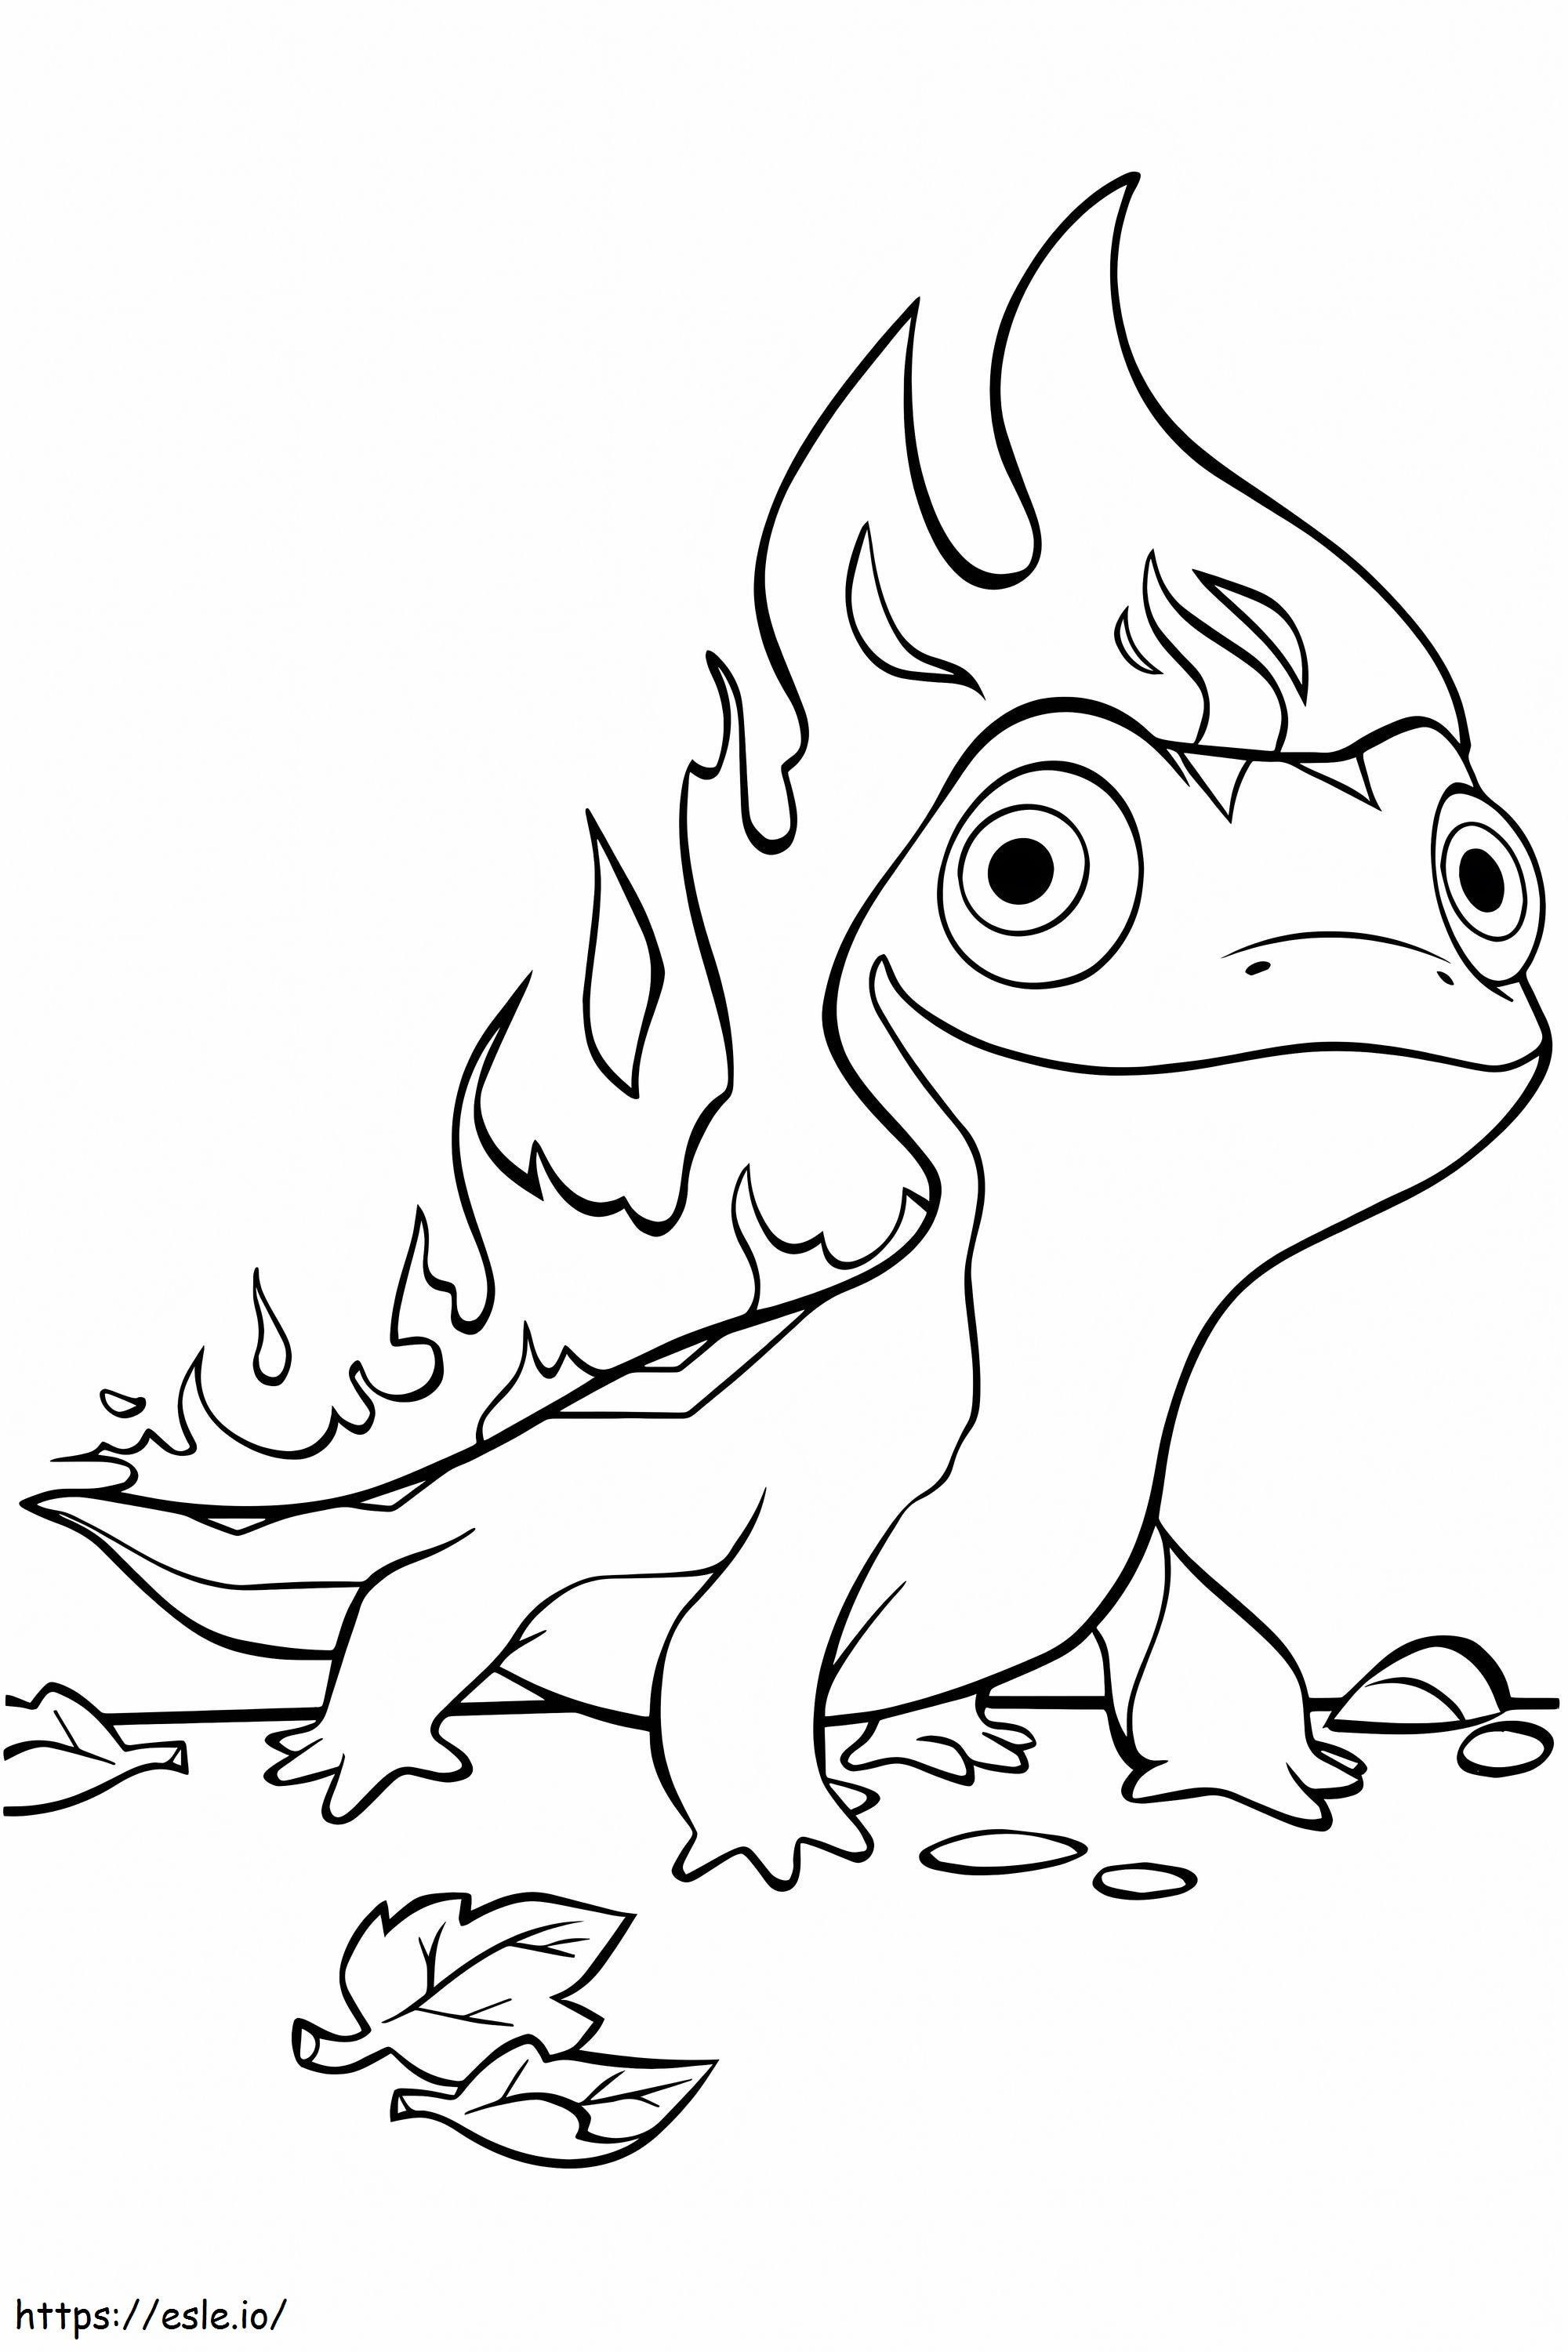 Bruni coloring page